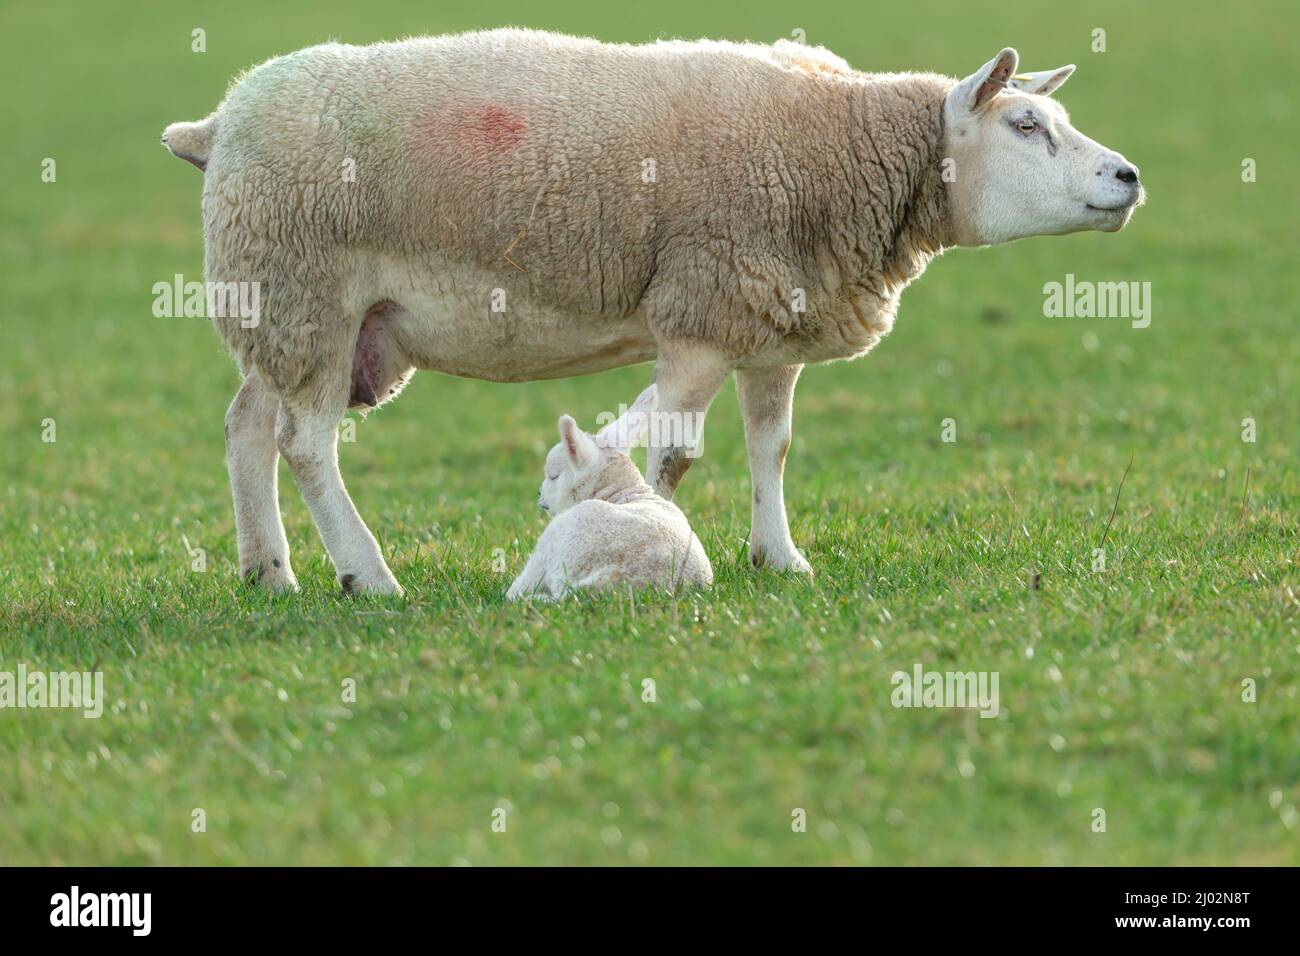 Close up of a fine Texel ewe or female sheep with her sleeping newborn lamb in early spring time.  clean green background.  Copy Space.  Horizontal. Stock Photo